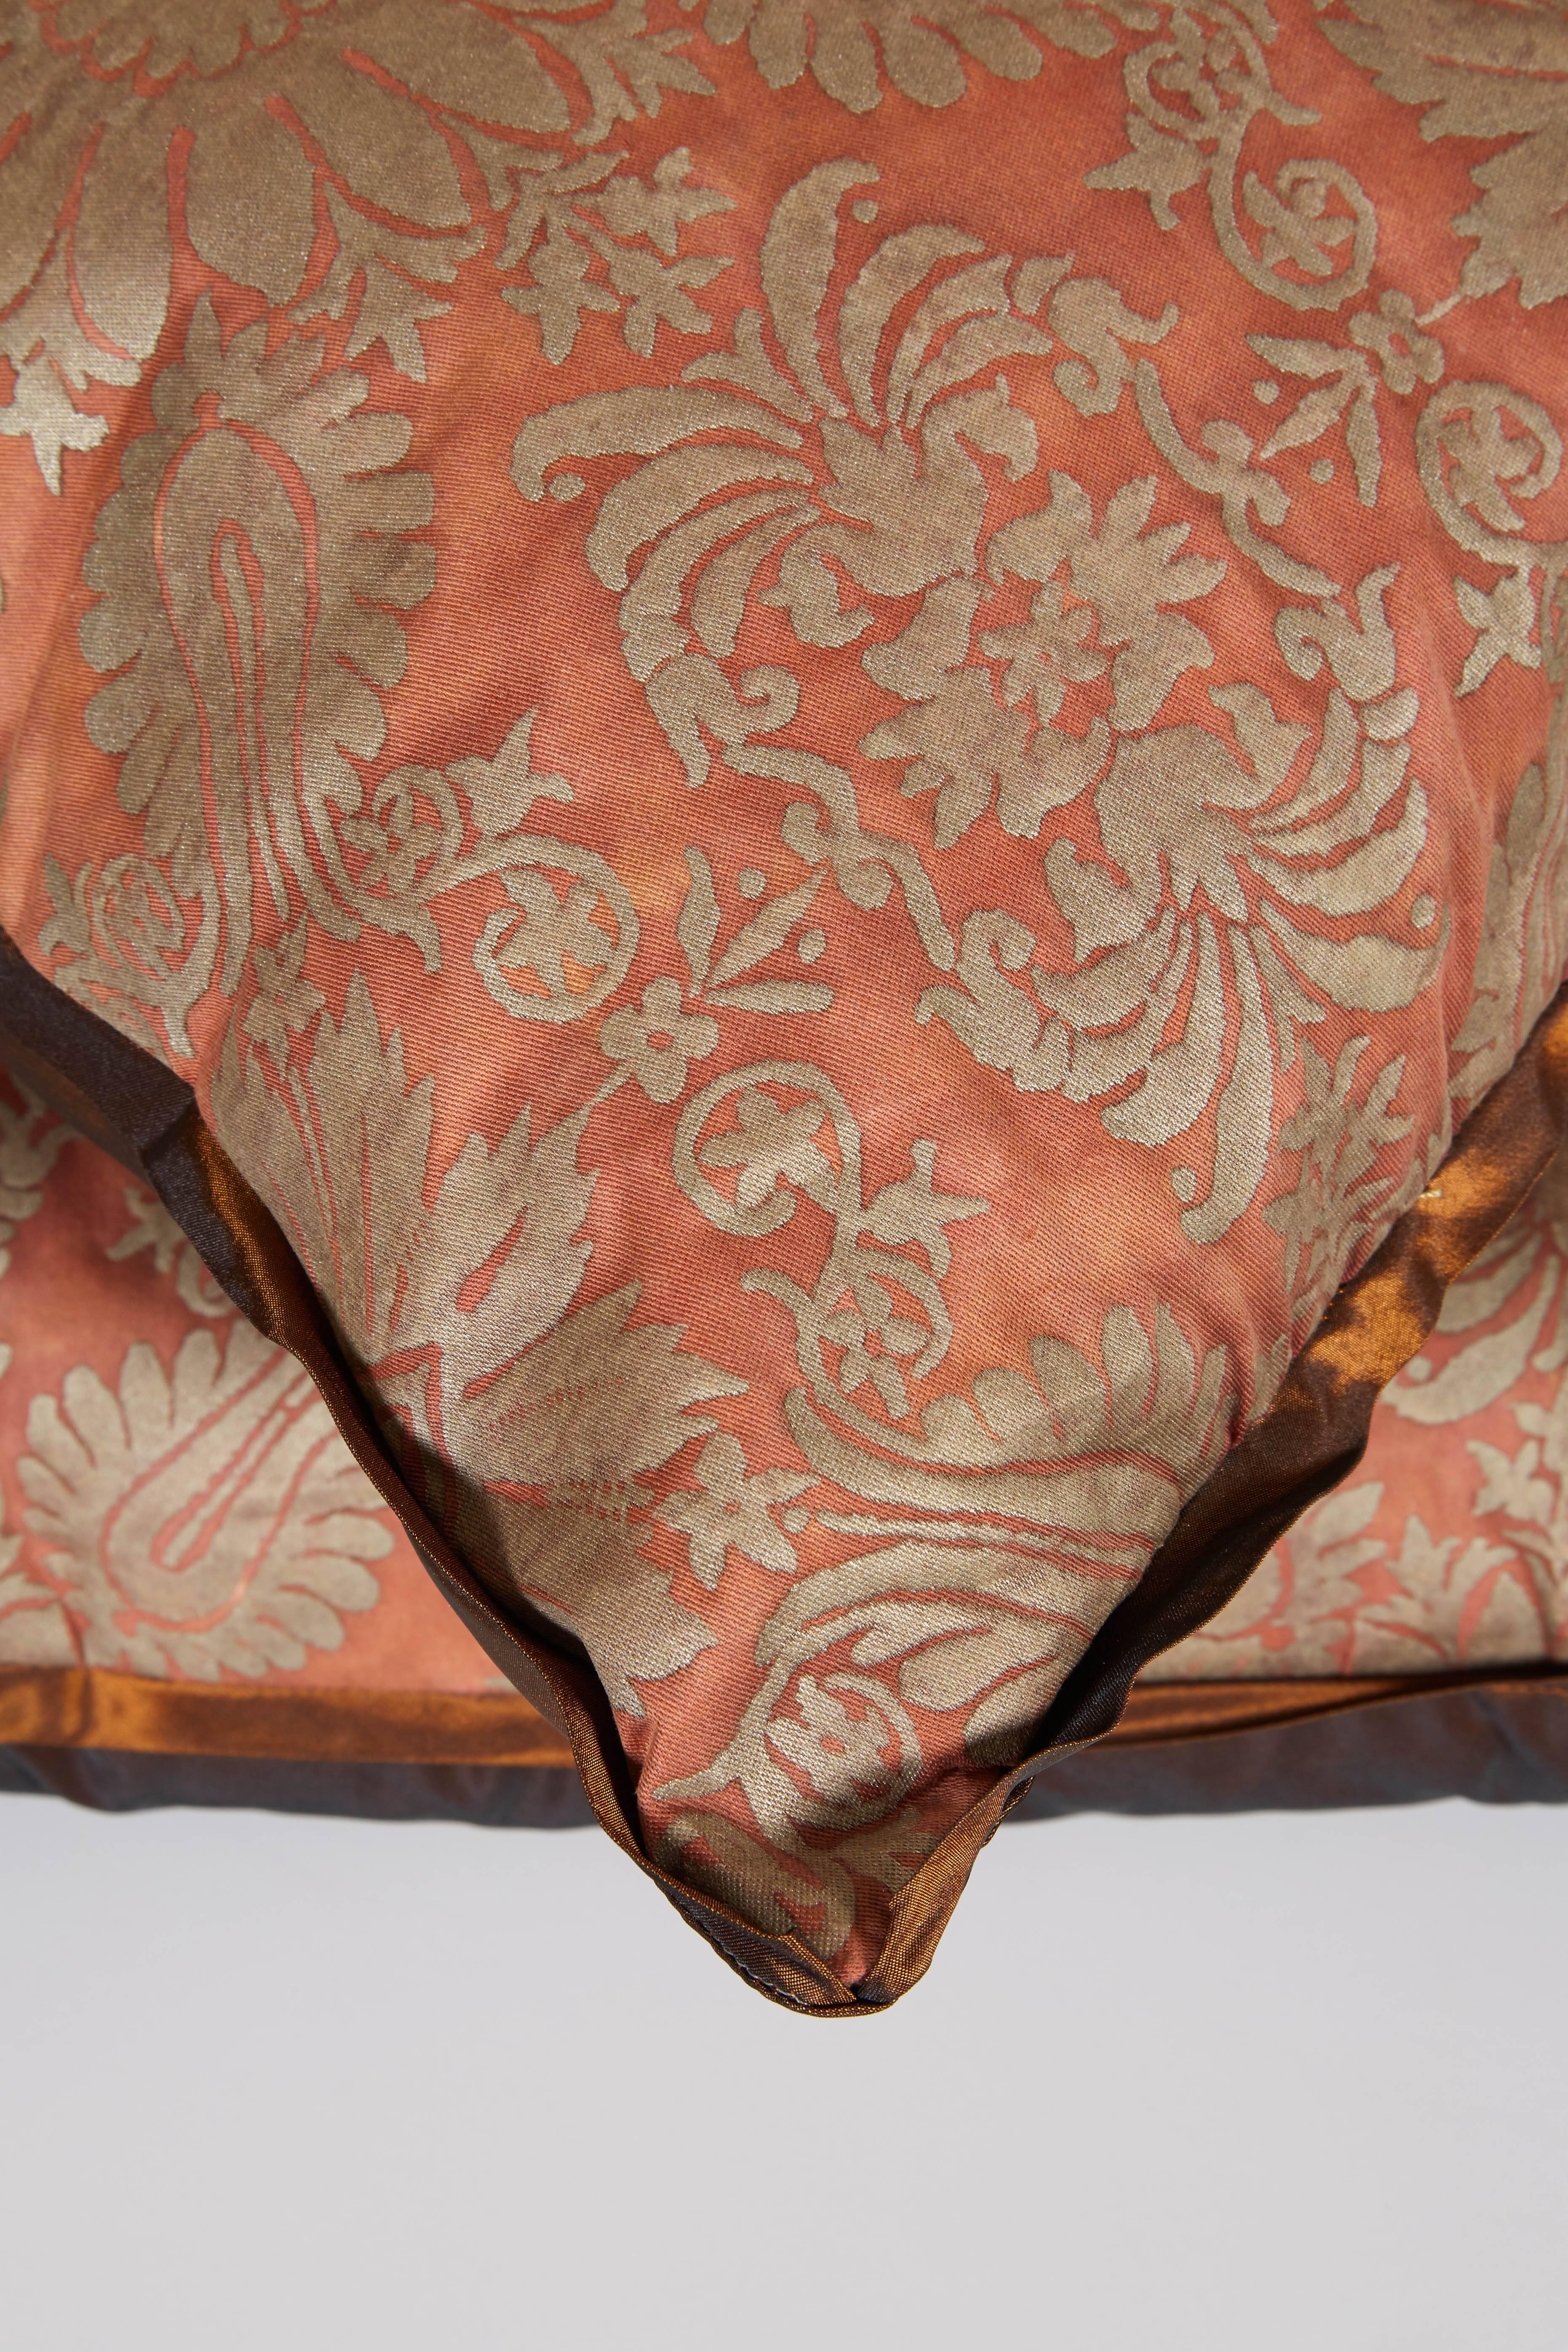 Empire Pair of Fortuny Fabric Cushion in the Impero Pattern